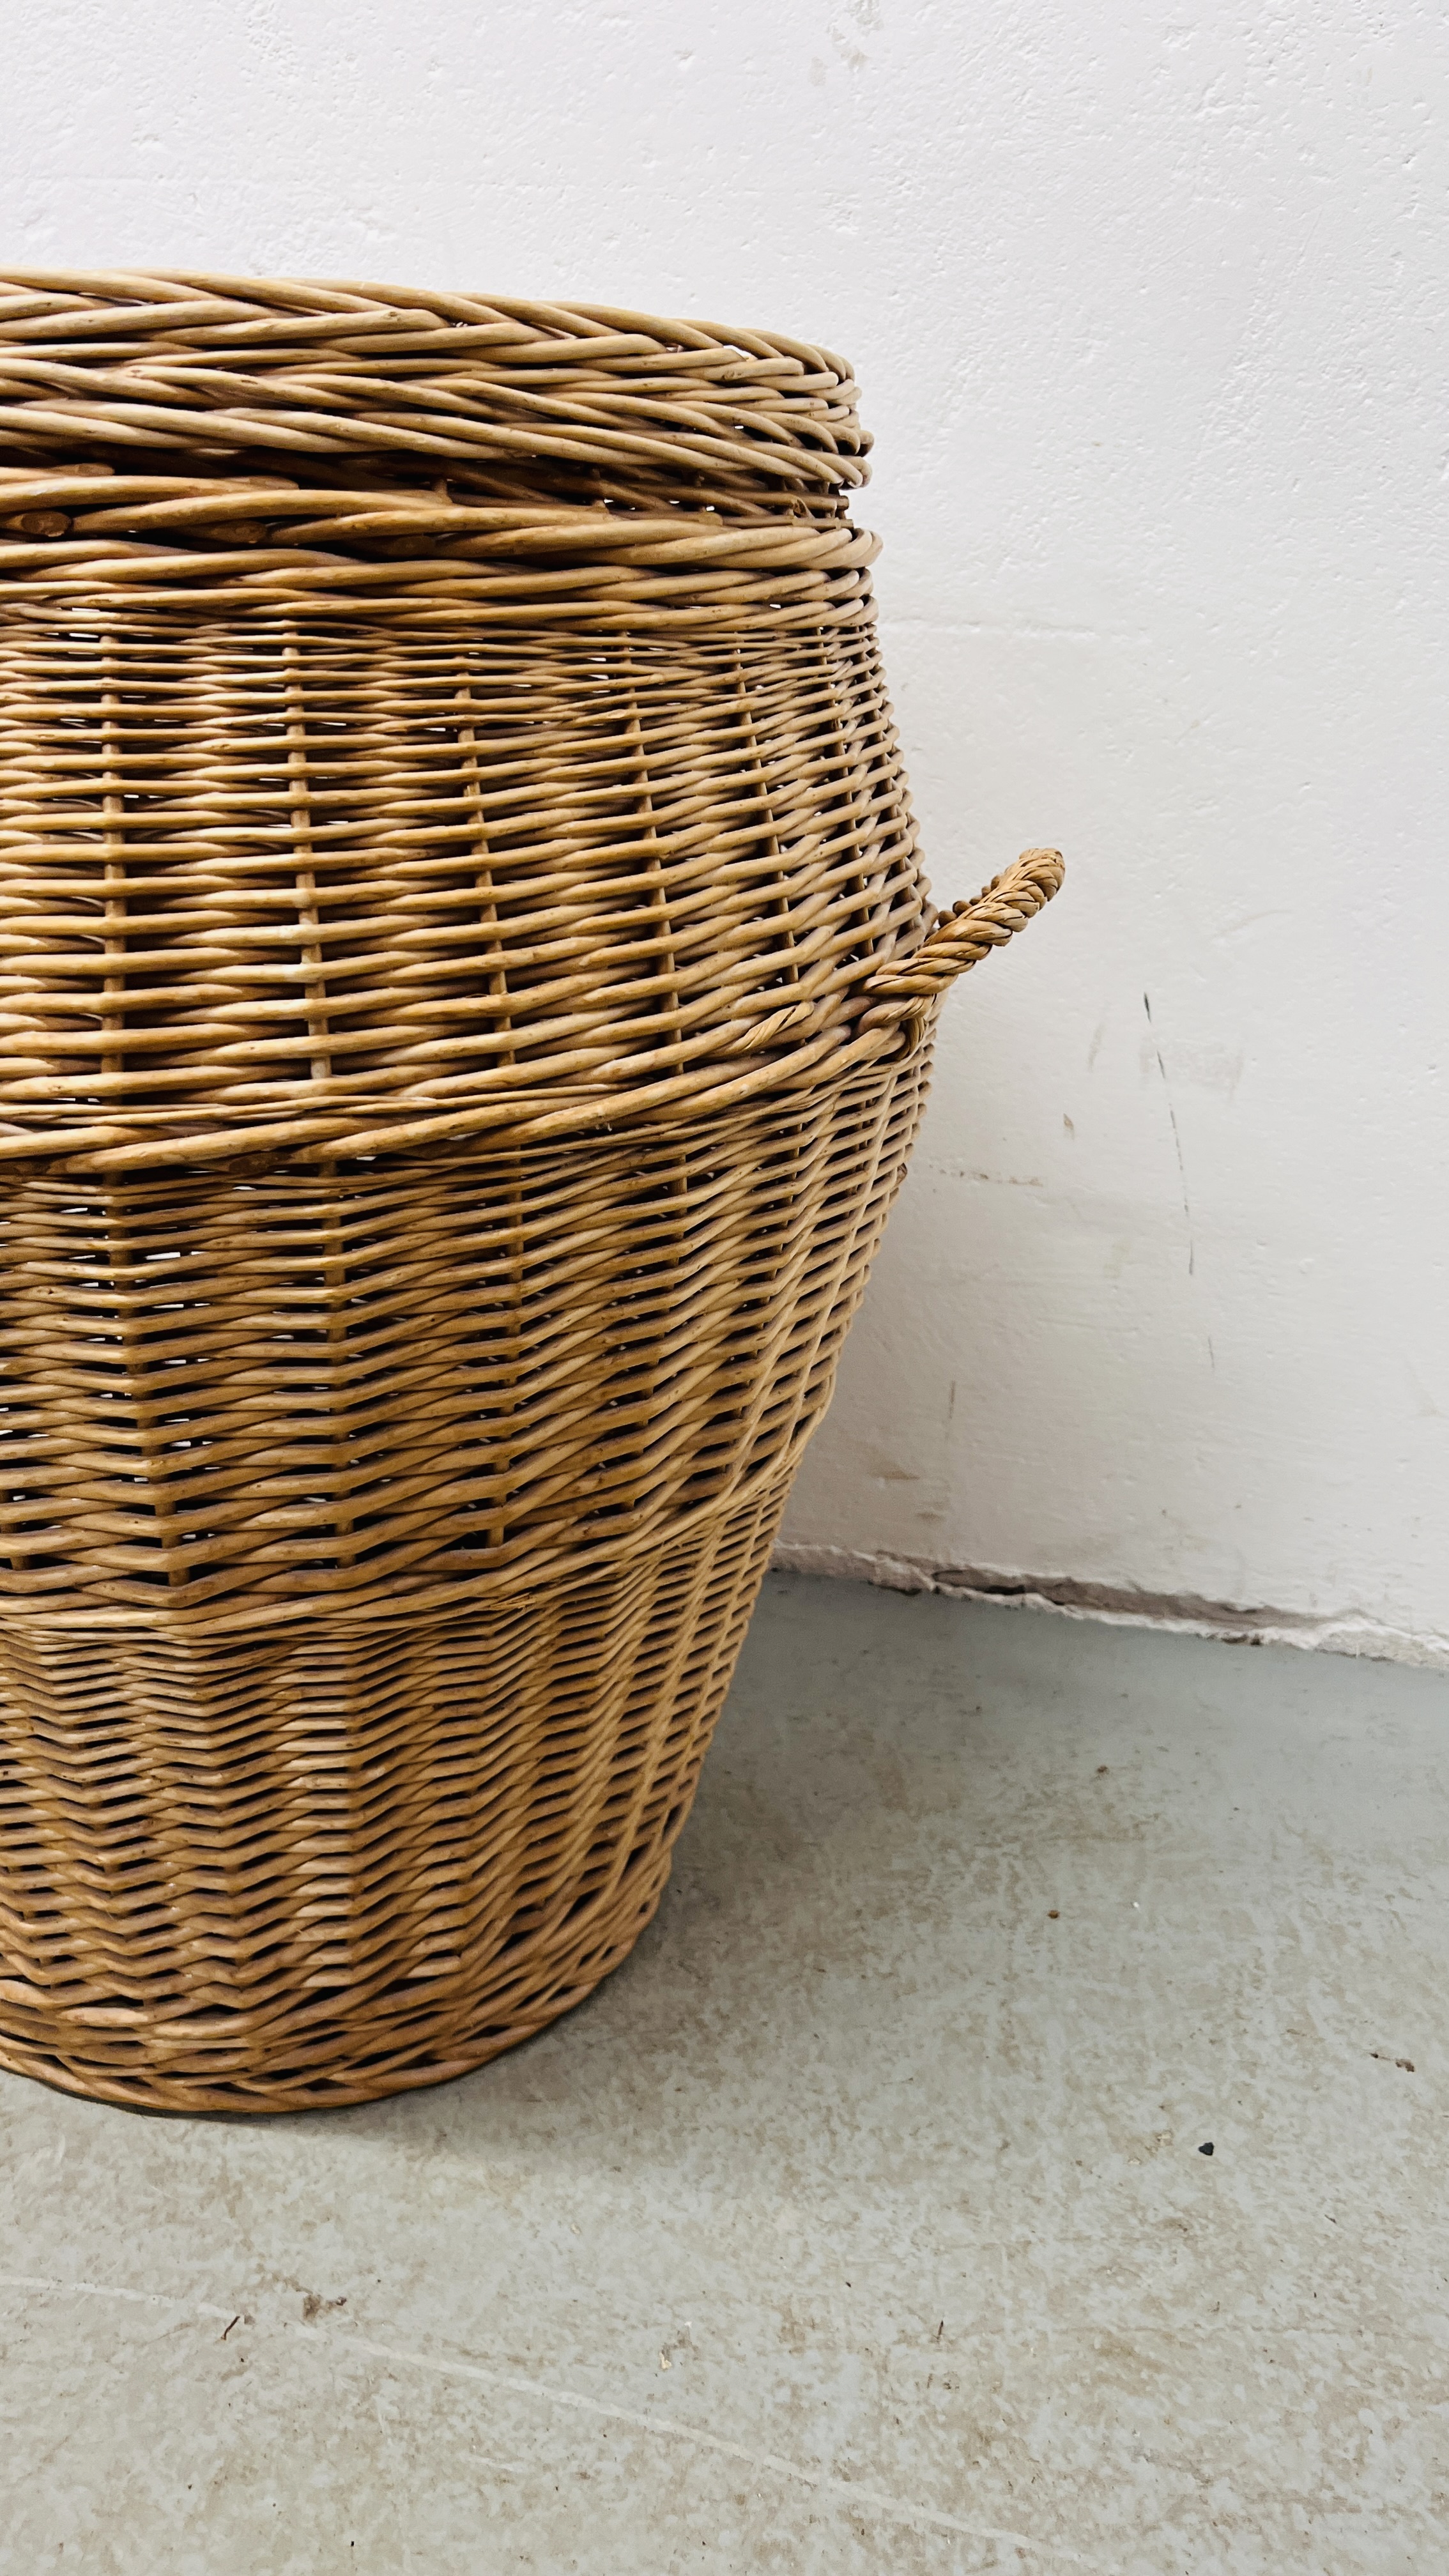 A WICKER LAUNDRY BASKET WITH LID, HEIGHT 60CM. - Image 3 of 5